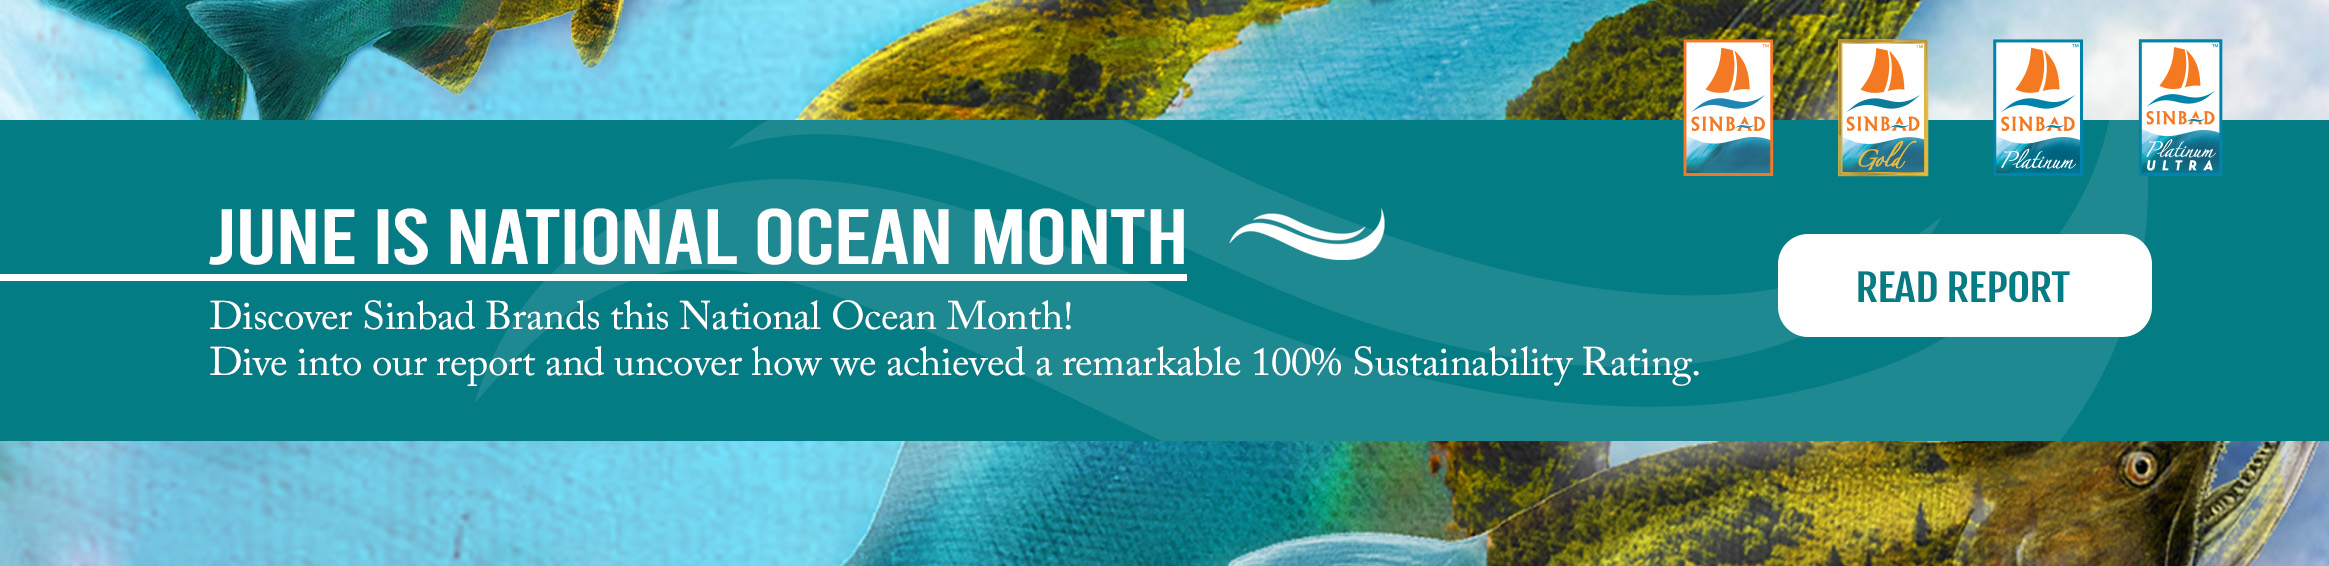 JUNE IS NATIONAL OCEAN MONTH - DISCOVER SINBAD BRANDS 100% SUSTAINABILITY RATING!